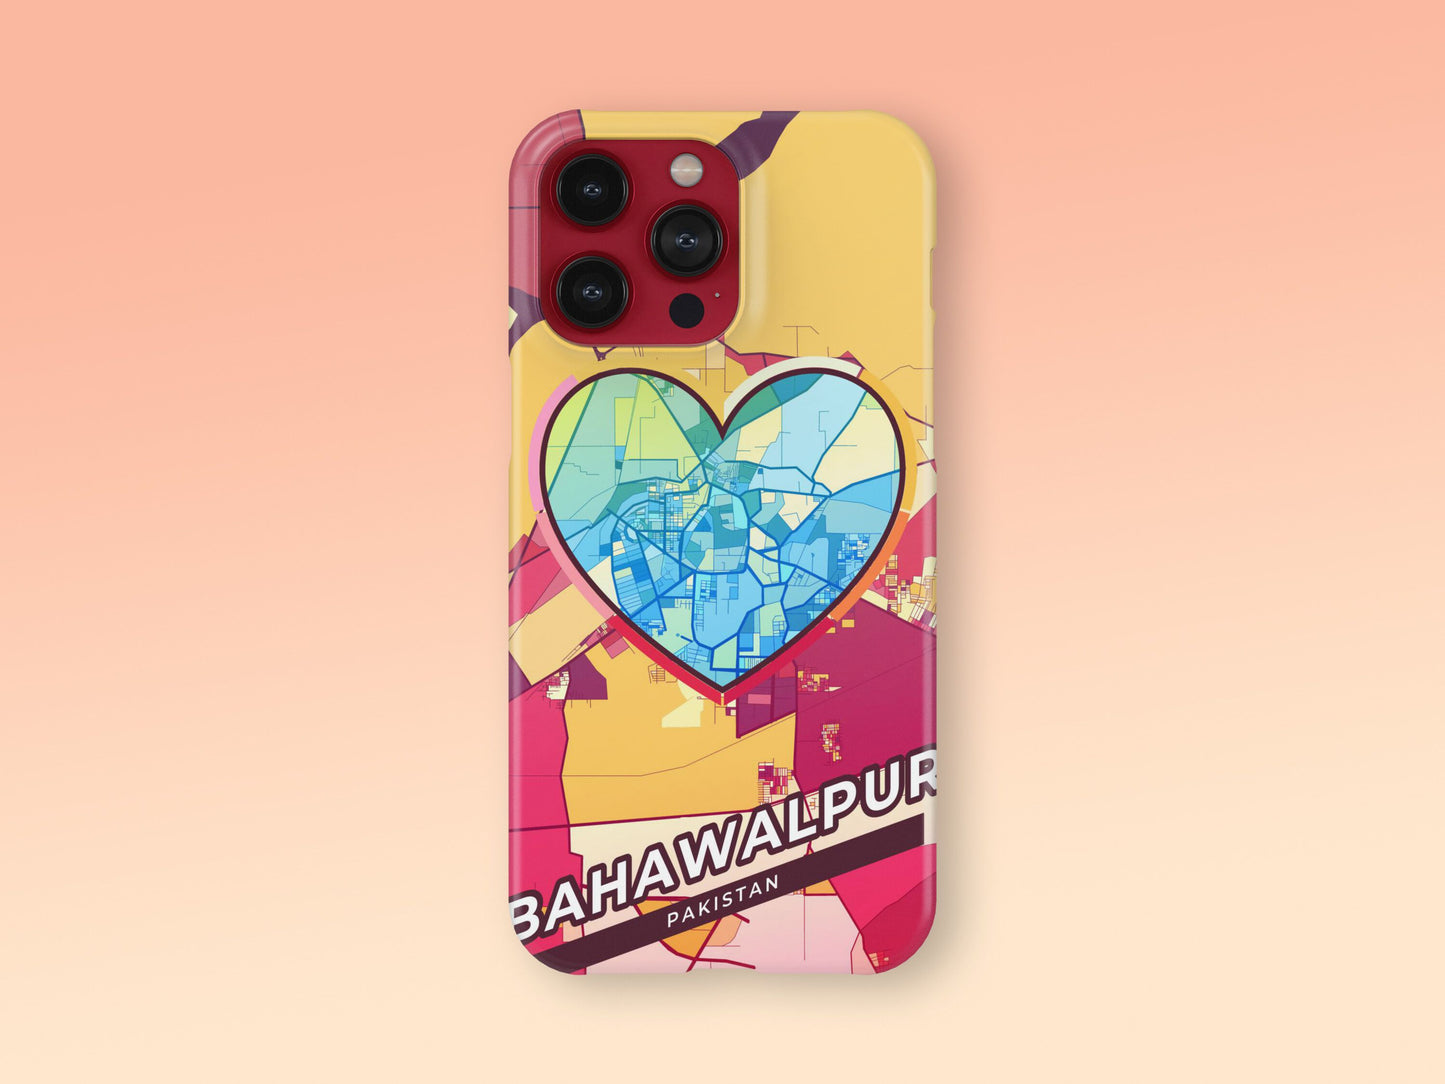 Bahawalpur Pakistan slim phone case with colorful icon. Birthday, wedding or housewarming gift. Couple match cases. 2